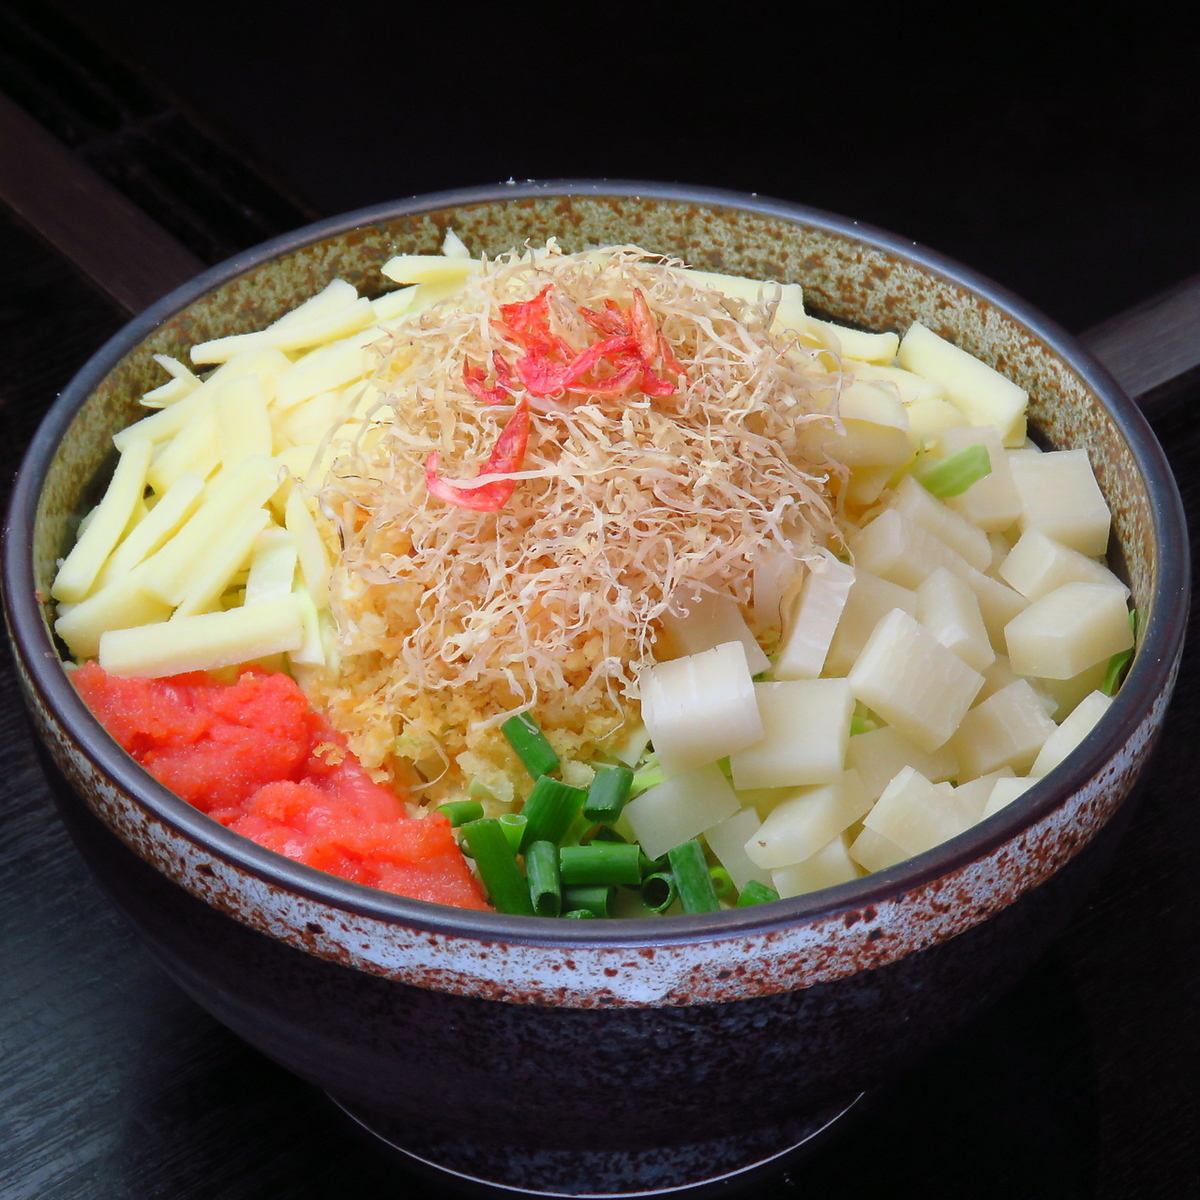 Hakata's special noodles are used to make sardine mochi cheese monja